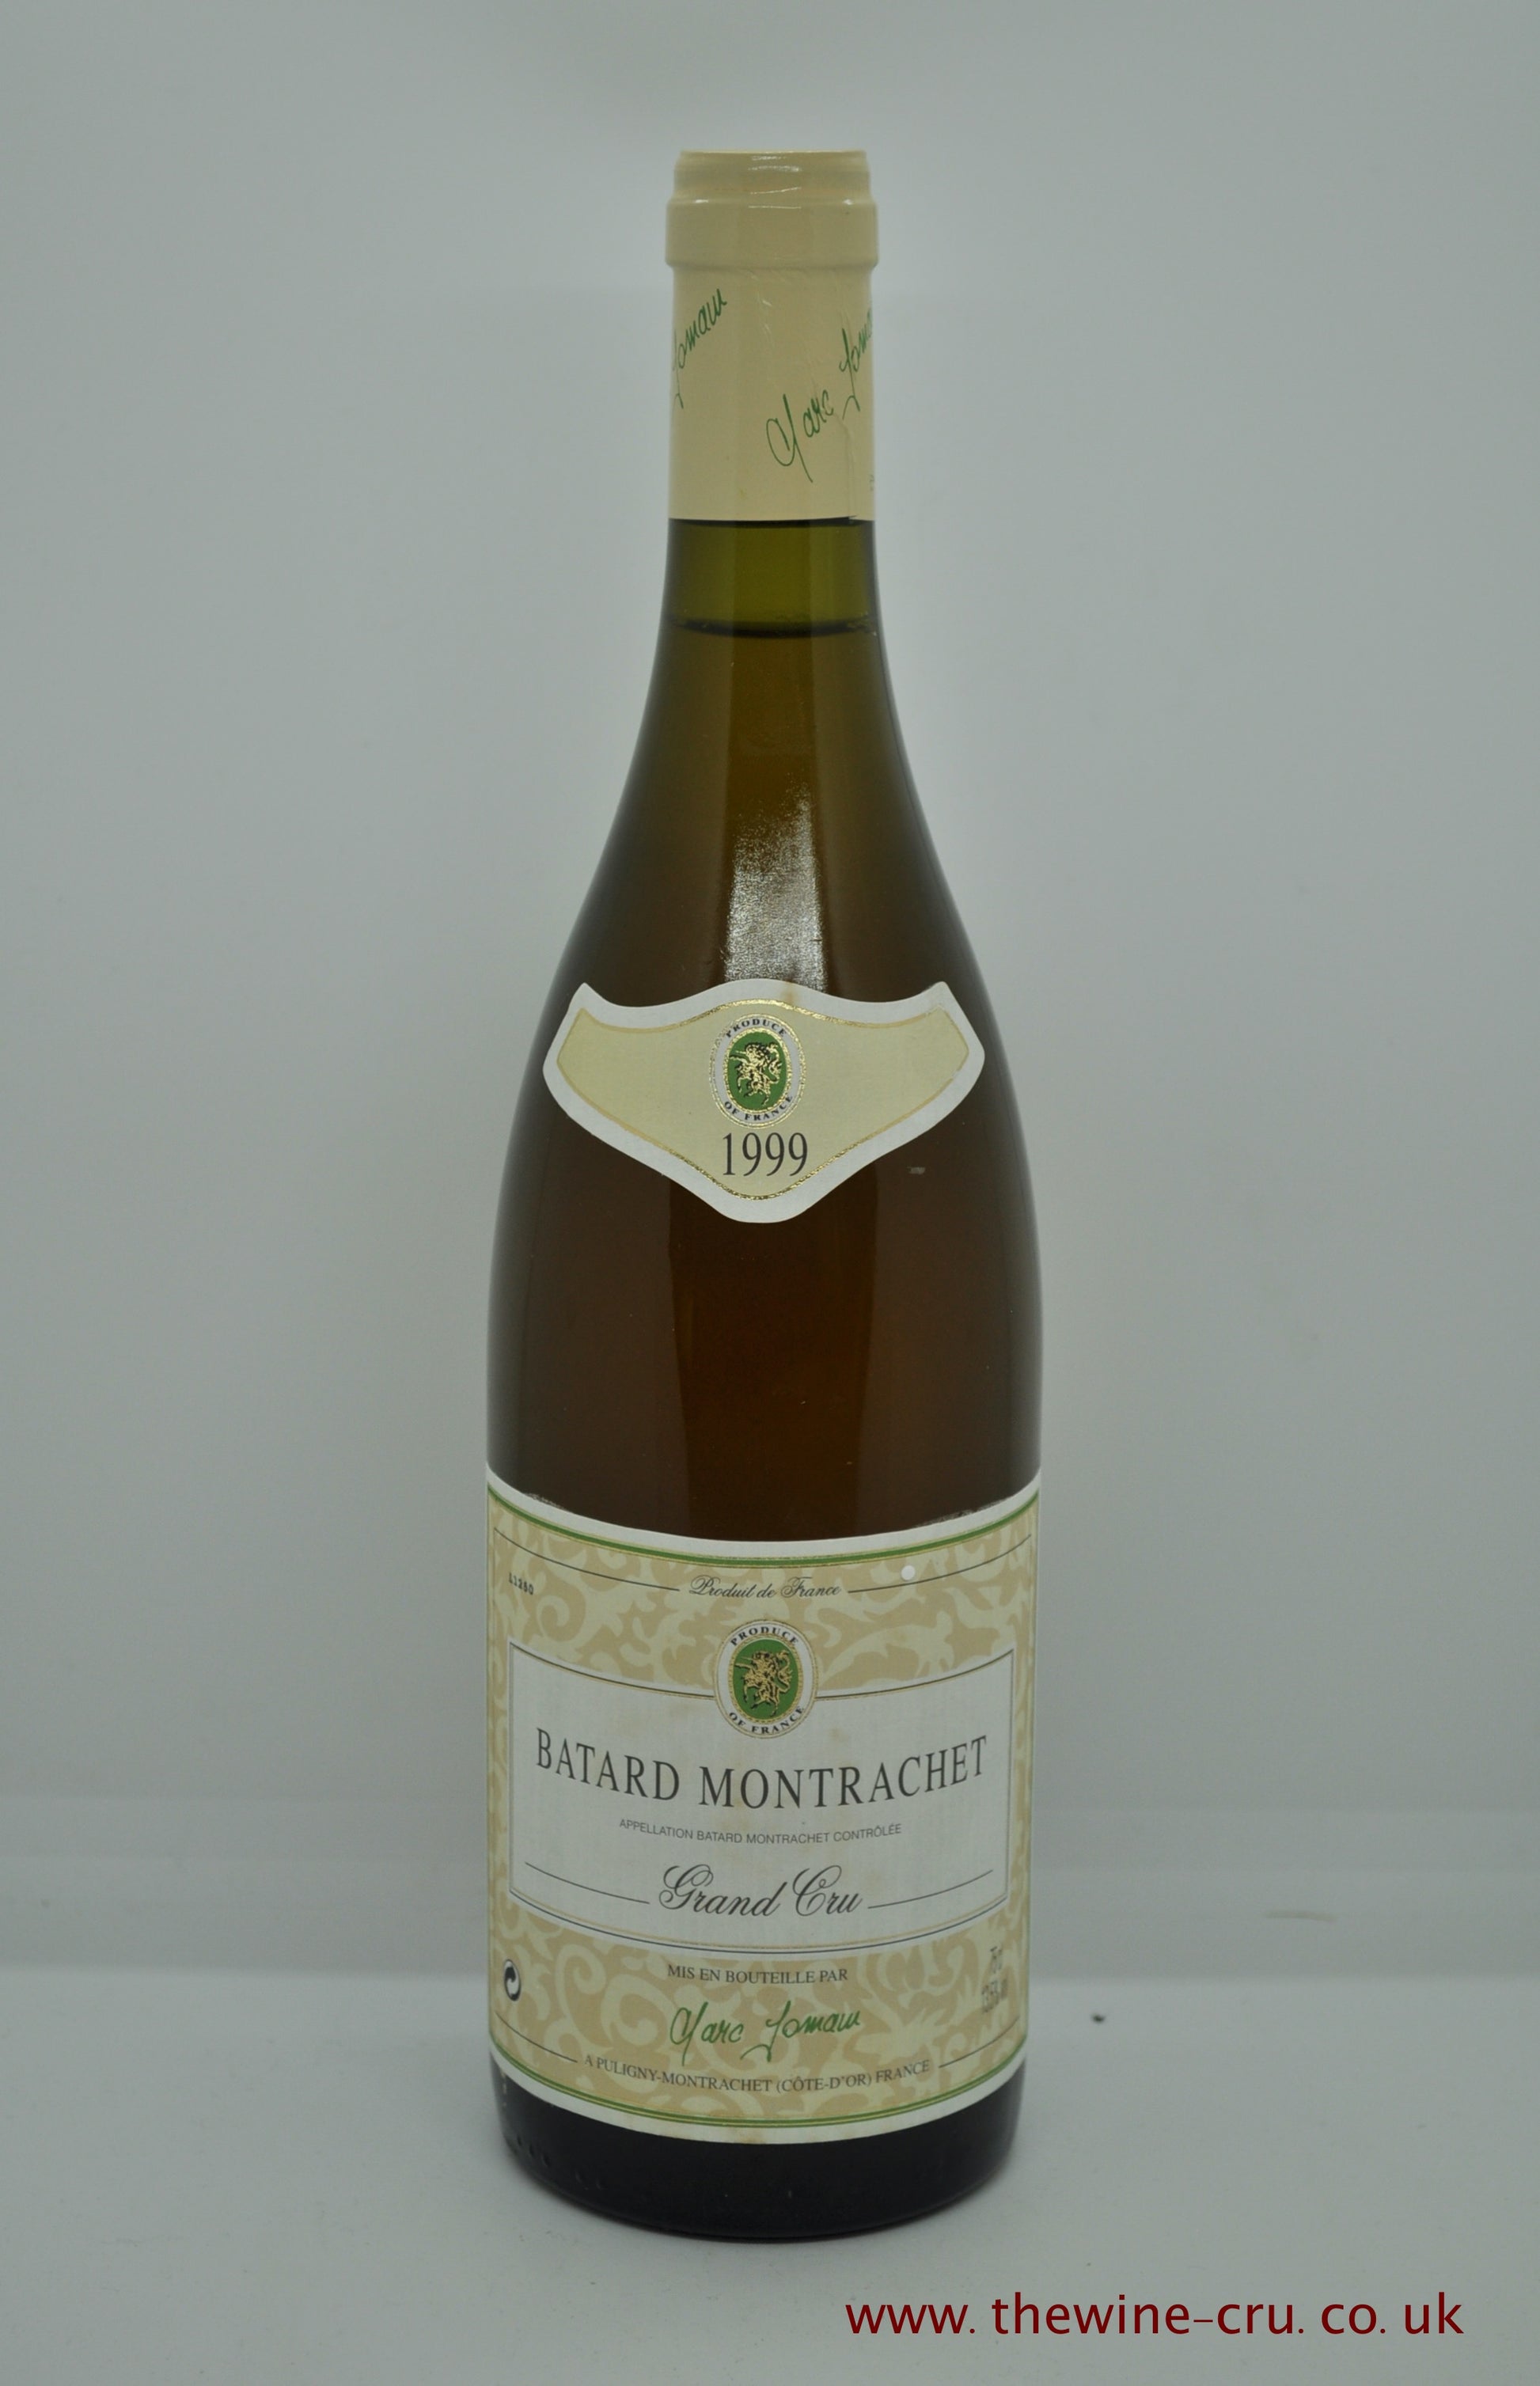 A bottle of 1999 vintage white wine. Batard Montrachet Domaine Jomain 1999. France Burgundy. Good capsule and label with the level of the wine below the capsule. The colour is a little dark as you would expect for a mature white Burgundy. Immediate delivery. Free local delivery. Gift wrapping available.